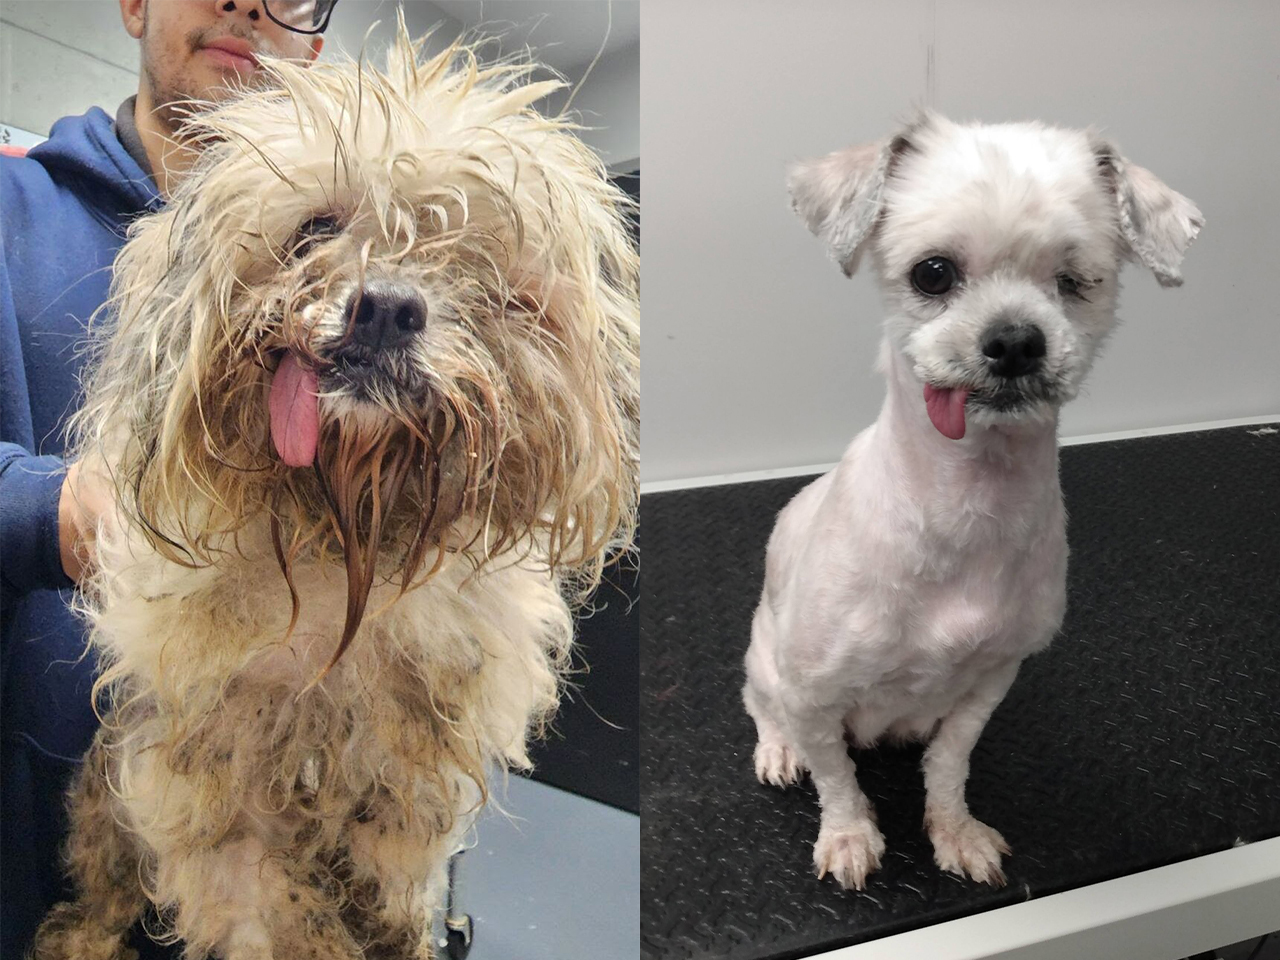 Fluffy was abandoned in an apartment in Allentown, PA, and discovered in deplorable condition. She was filthy and matted when the police brought her into the shelter. A full groom revealed her to be a beautiful one-eyed girl with a permanently outstretched tongue. Several weeks after arriving at the shelter, Fluffy was adopted by a loving family.